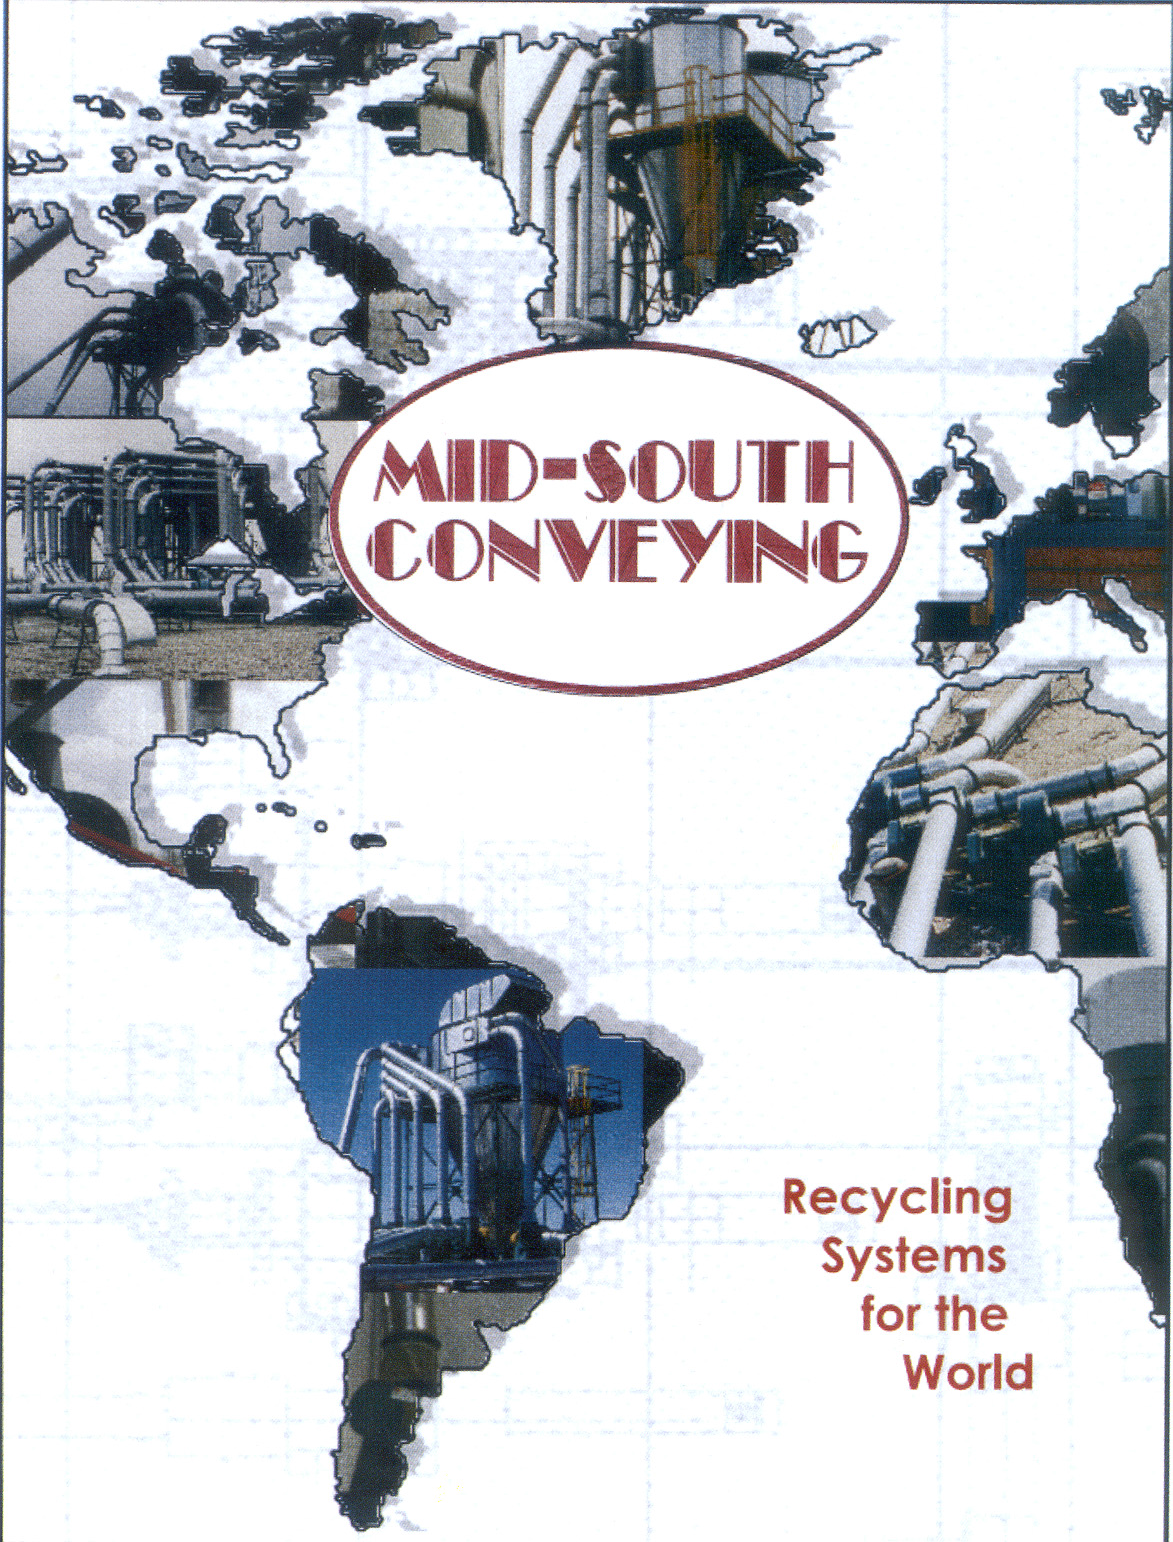 Learn more about the Cyclone in the Midsouth Conveying brochure. 